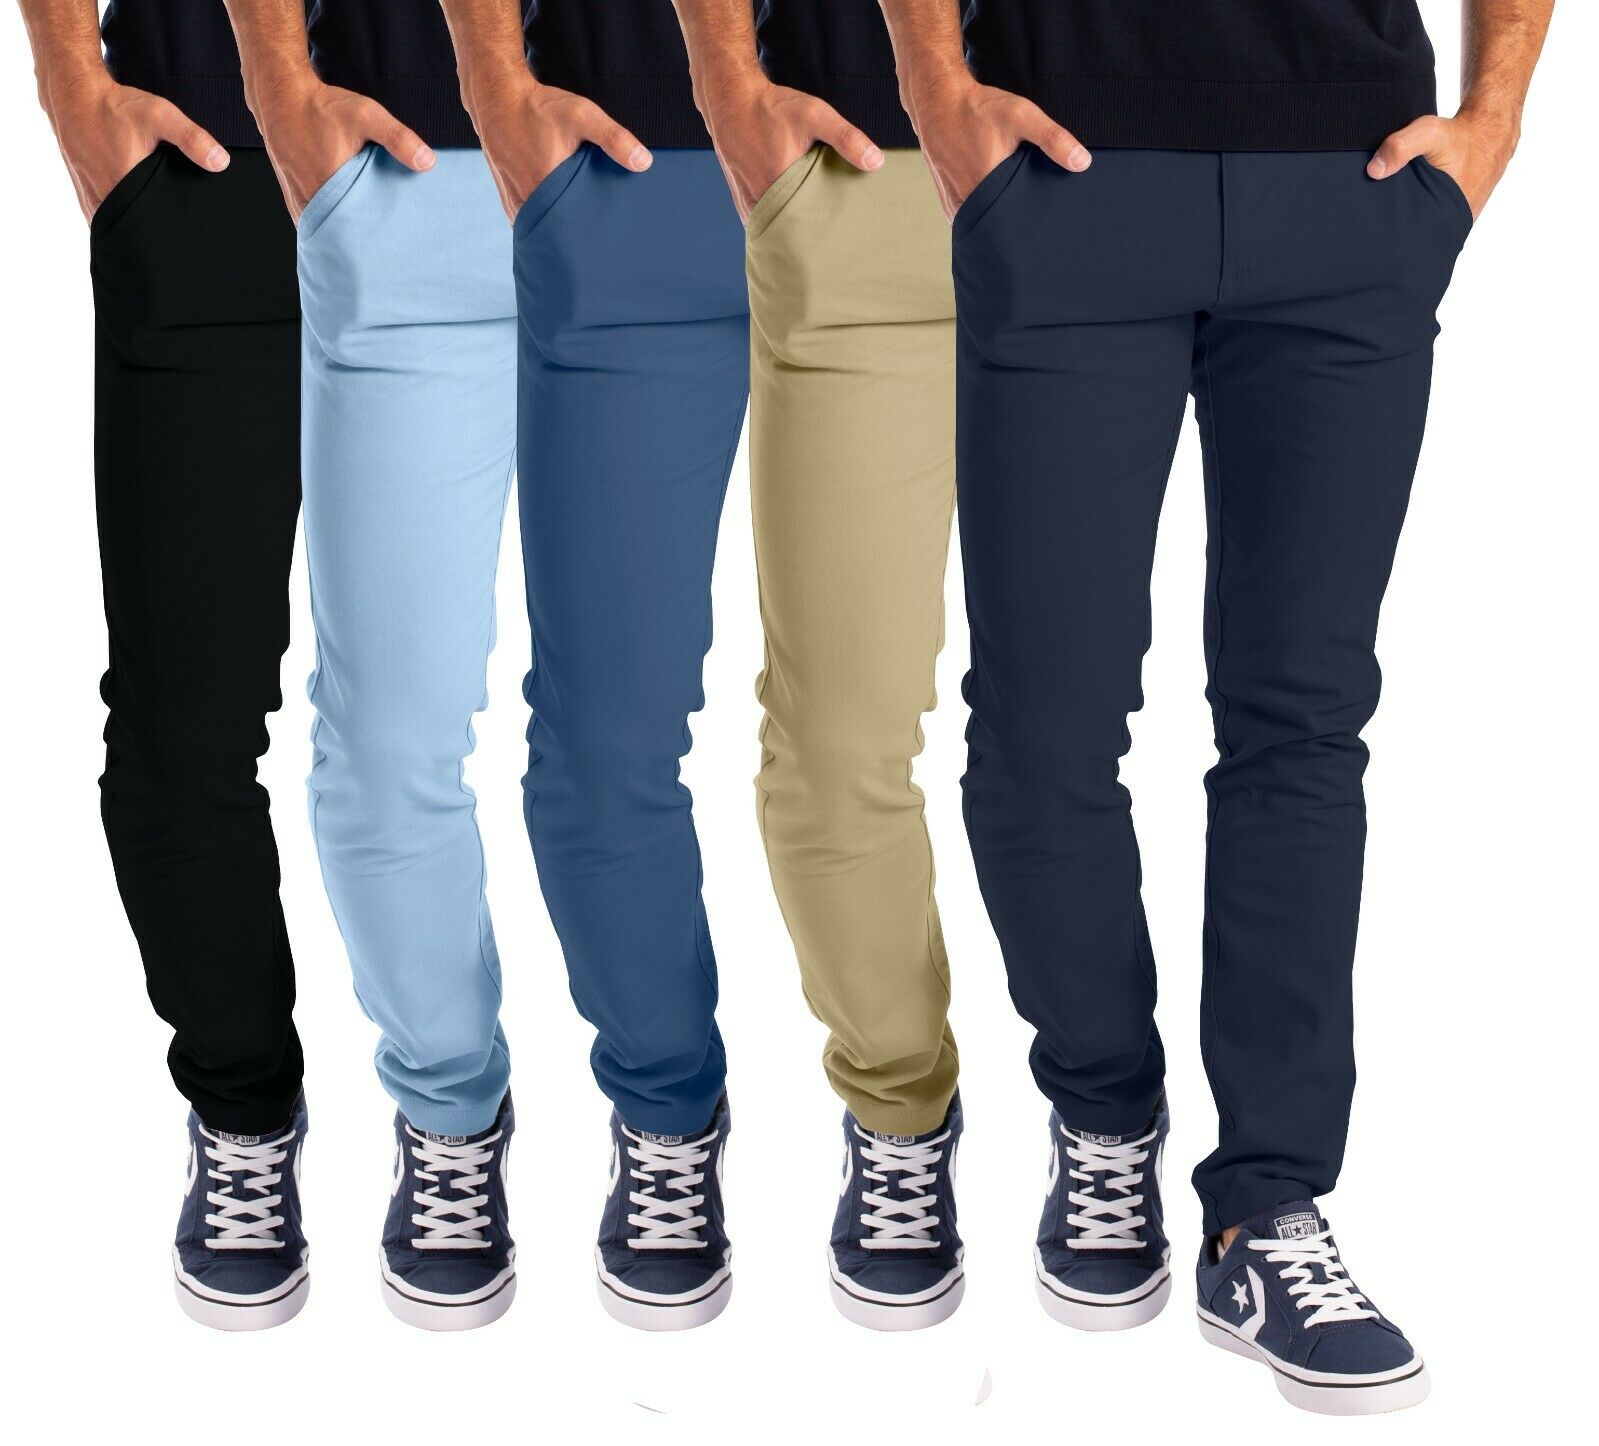 Mens Stretch Skinny Slim Fit Chino Pants Flat Front Casual Super Spandex Trouser